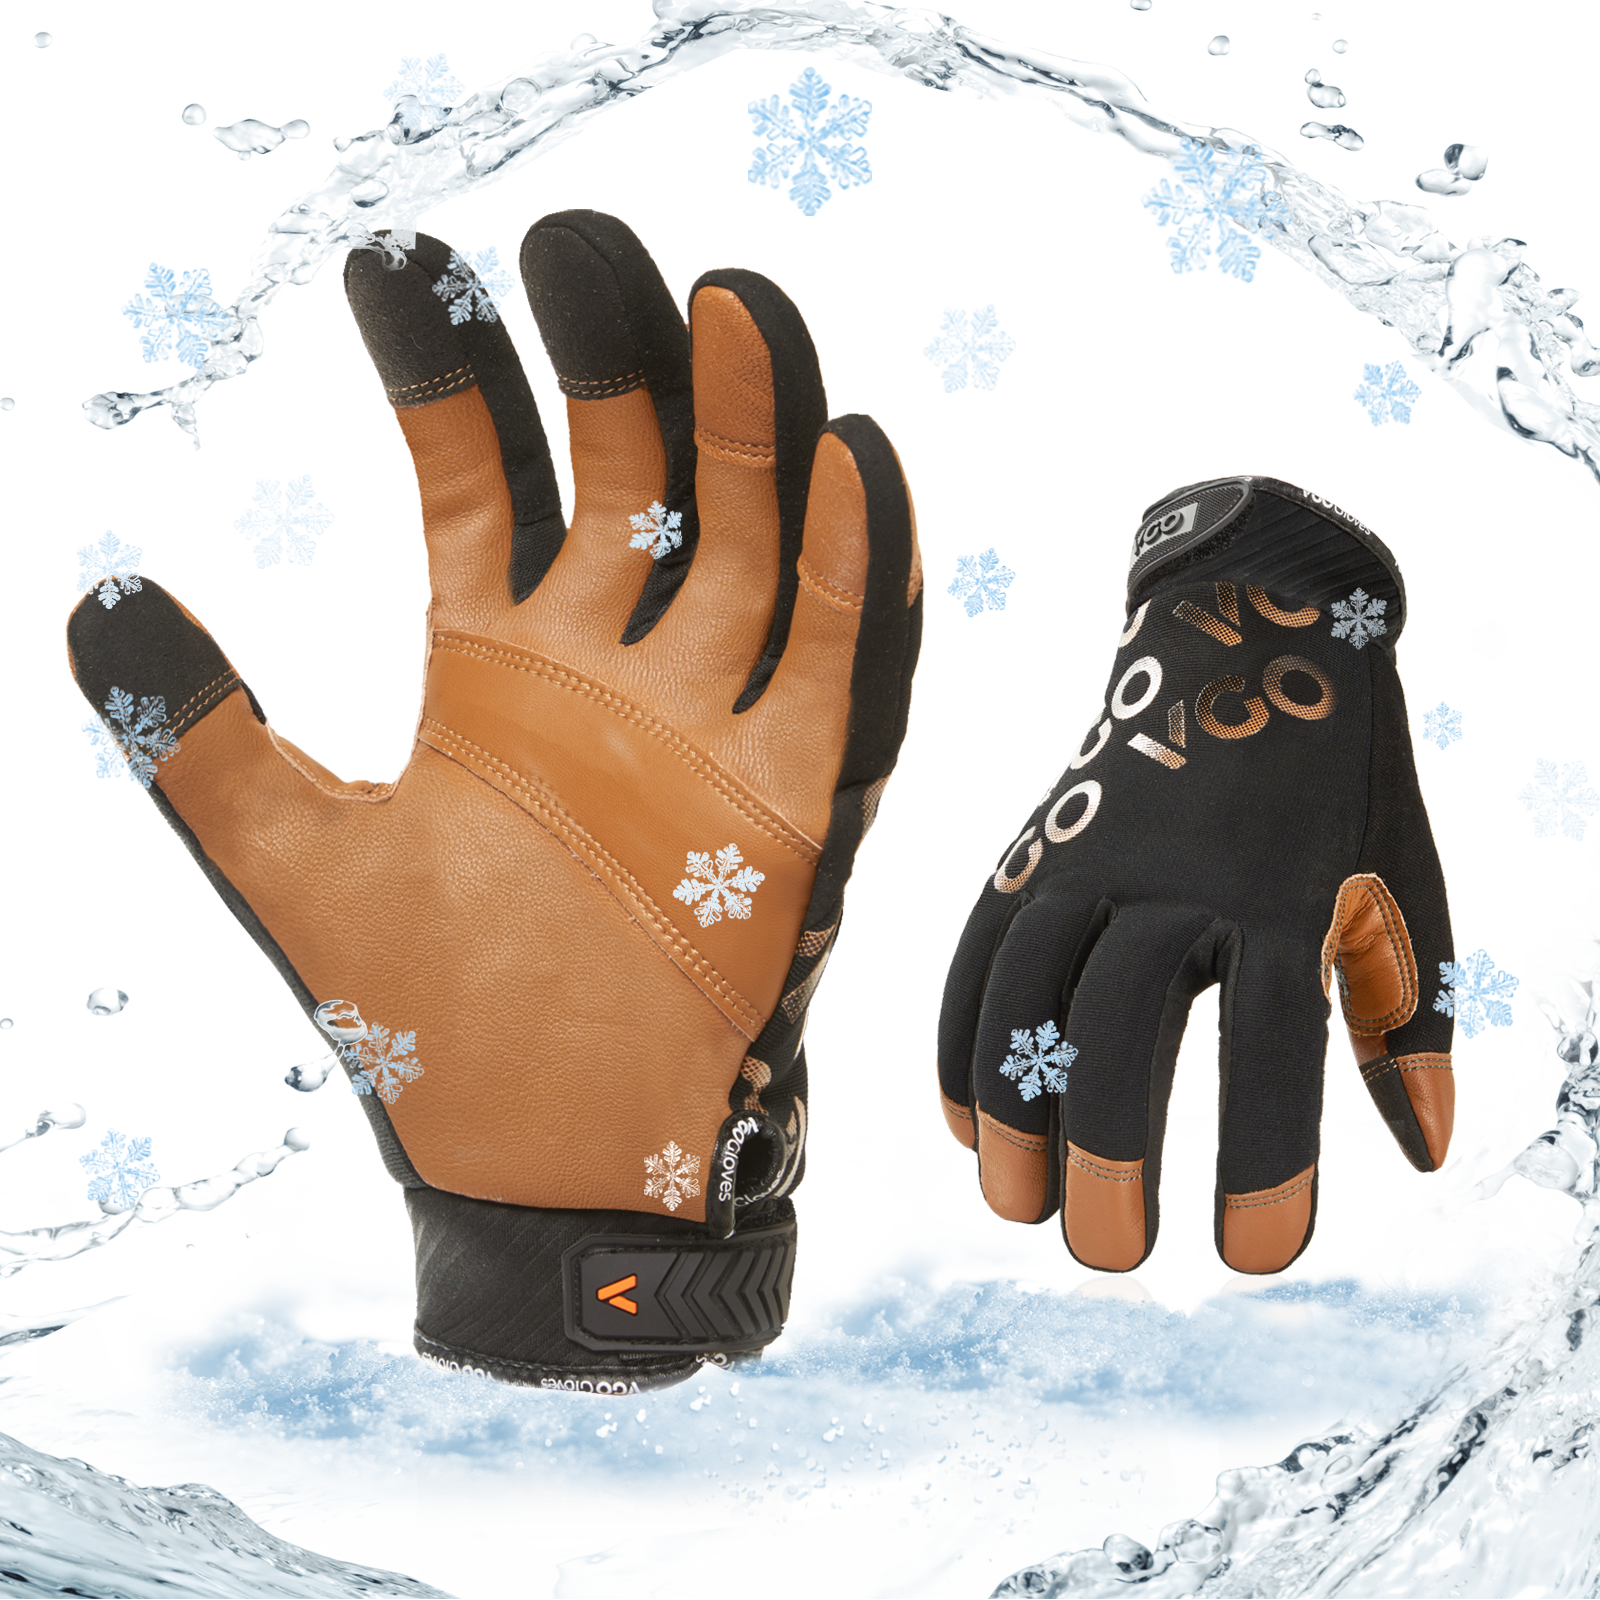 KAYGO Insulated Mechanic Work Gloves KG126W,Winter Insulated Double  Lining,Heavy duty,Improved dexterity,Excellent Grip,Ideal for working on  cars and